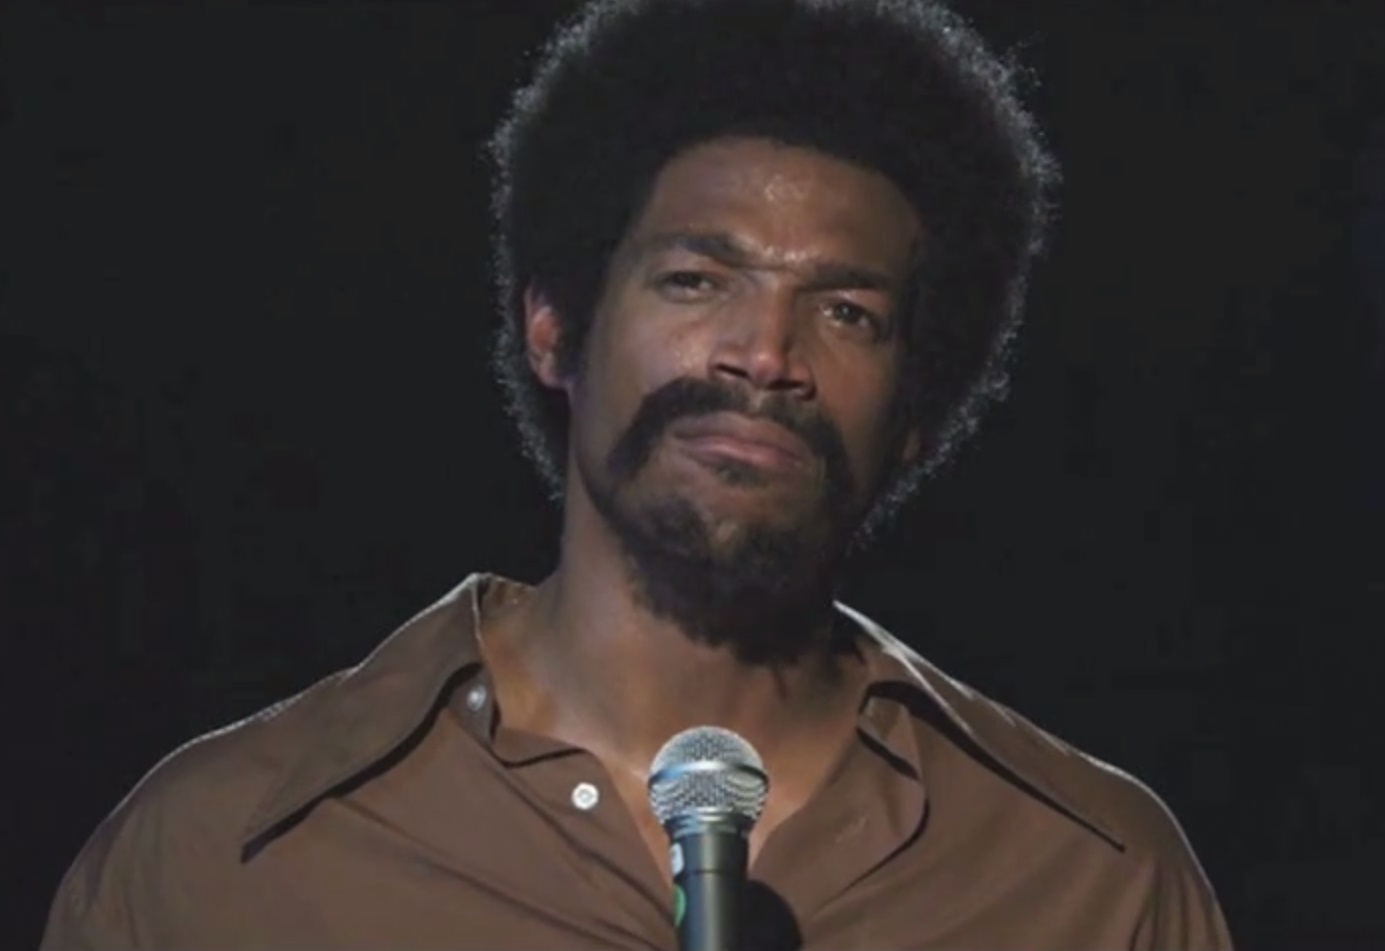 Alternate timeline: Marlon Wayans as Richard Pryor in this old audition footage for the comedian’s biopic